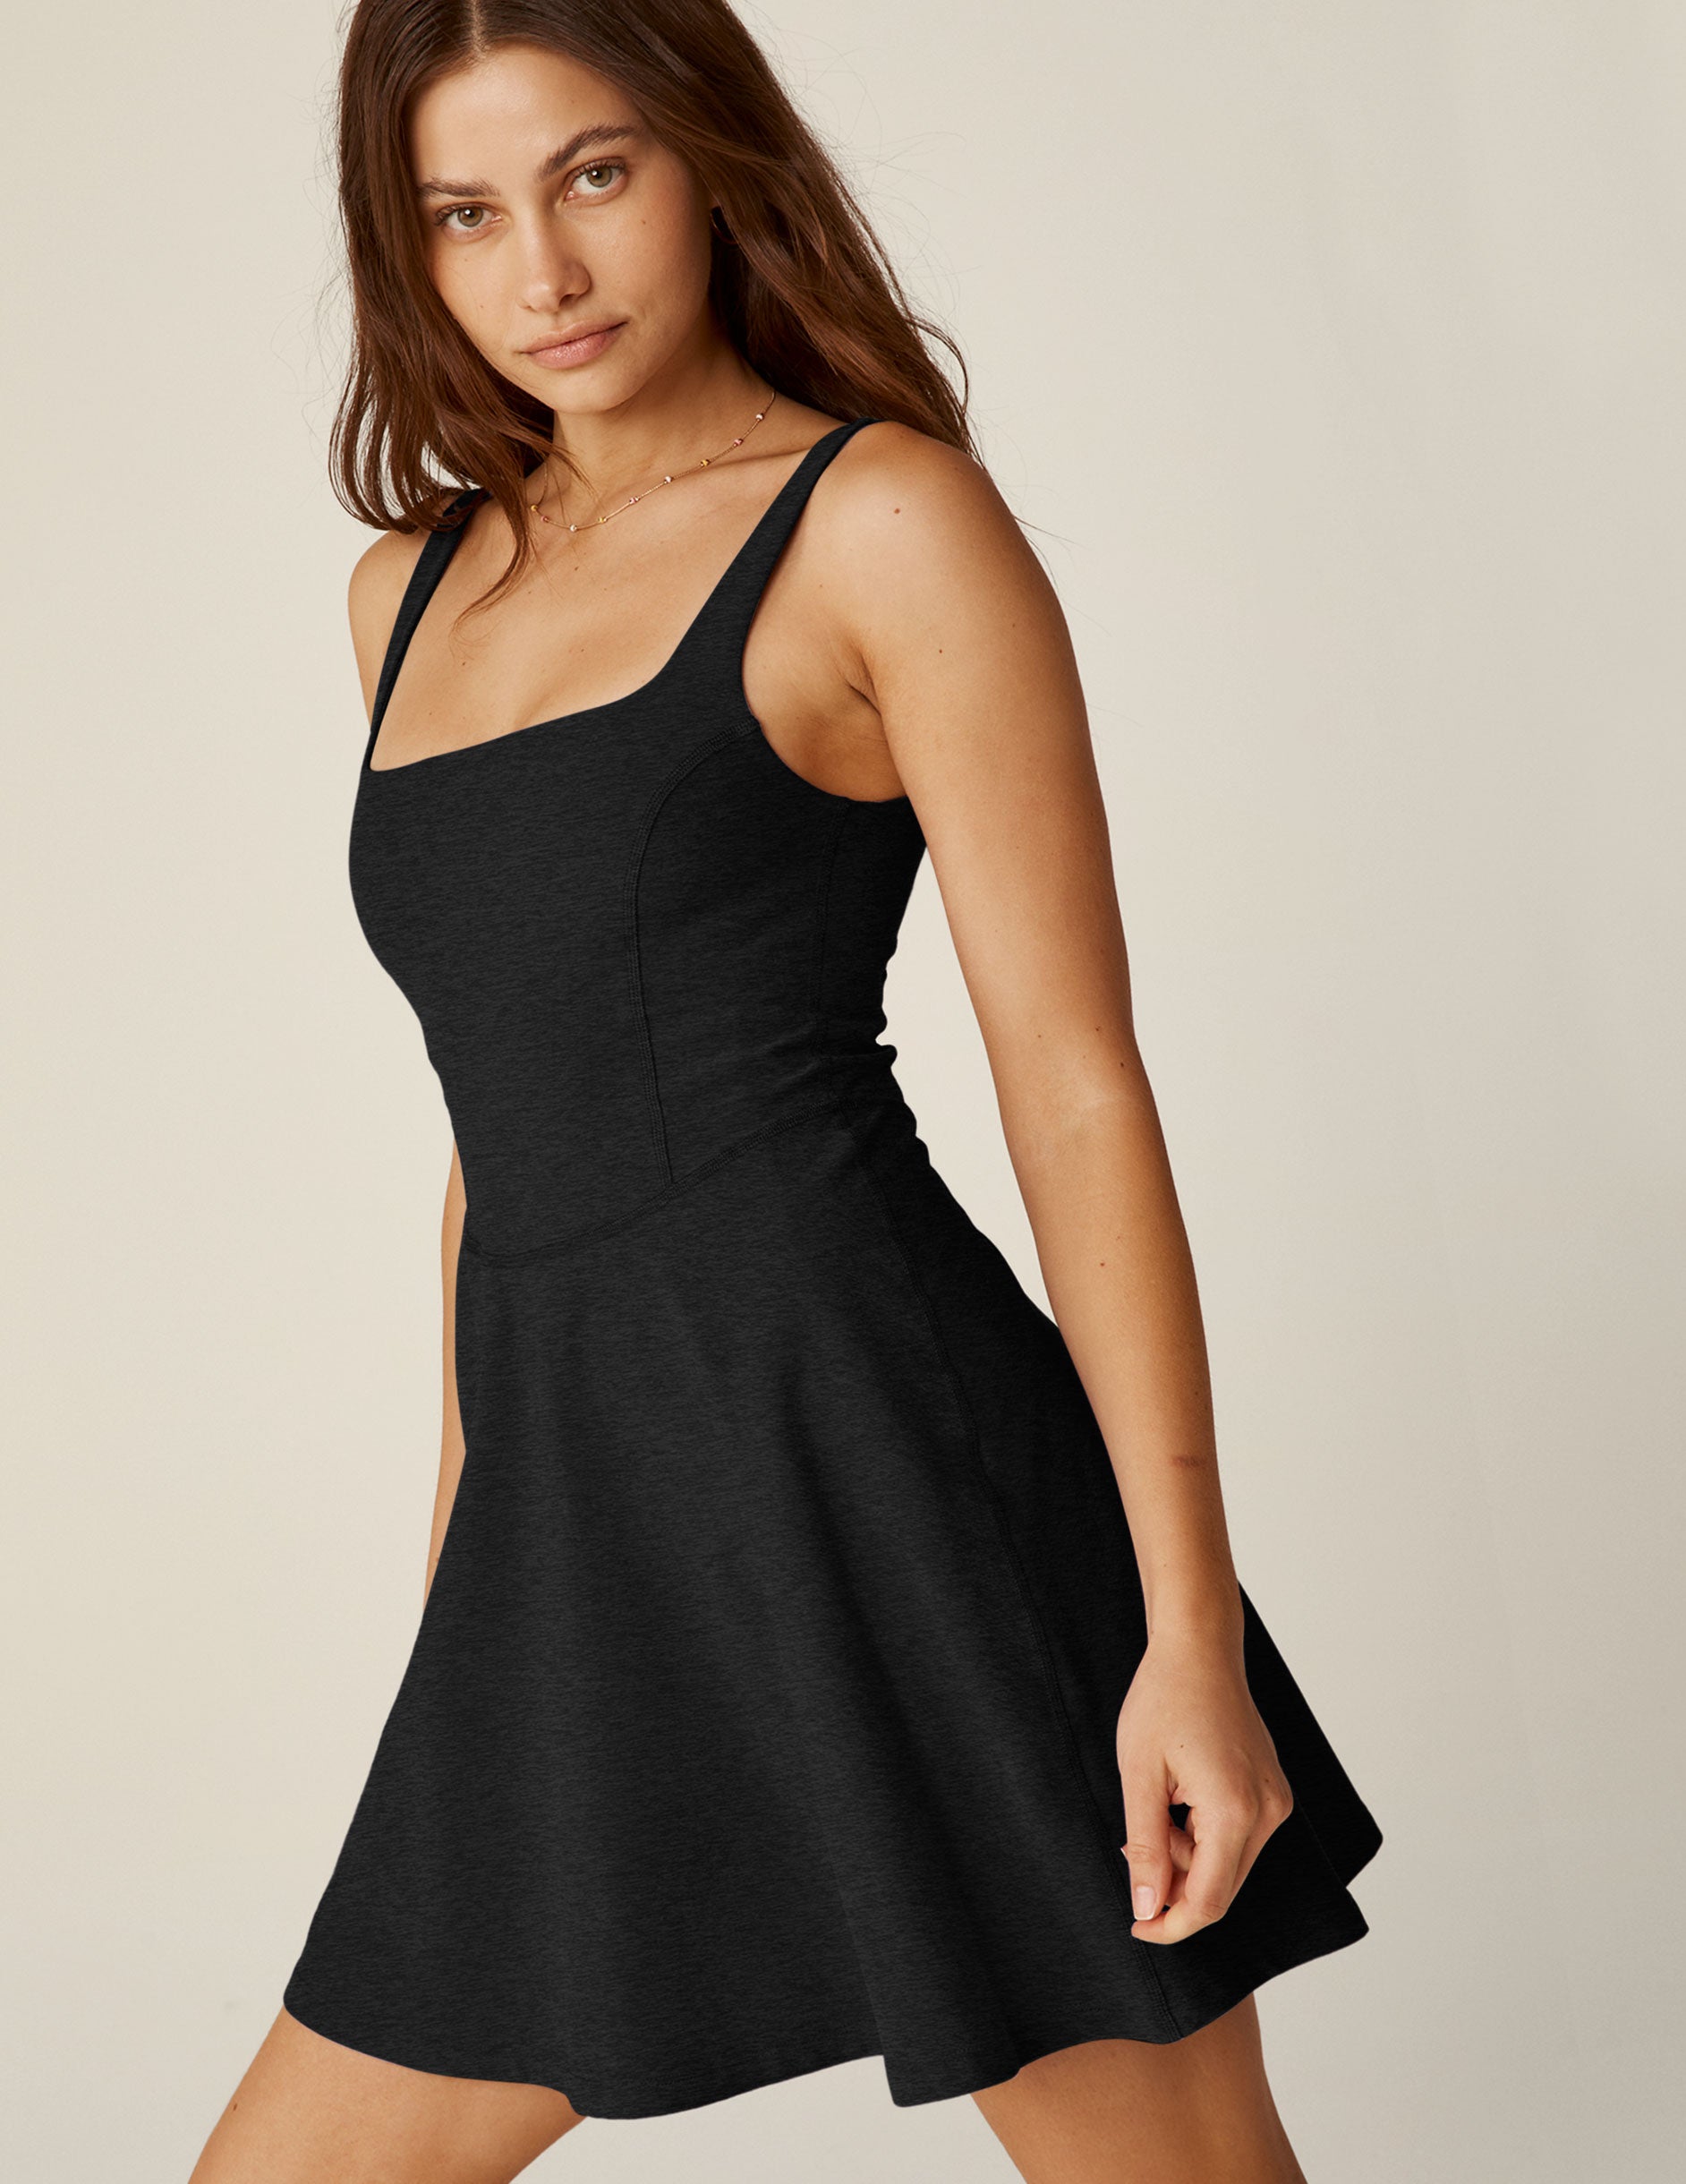 black mini spacedye dress with a squared neckline and built-in shorts with pockets. 